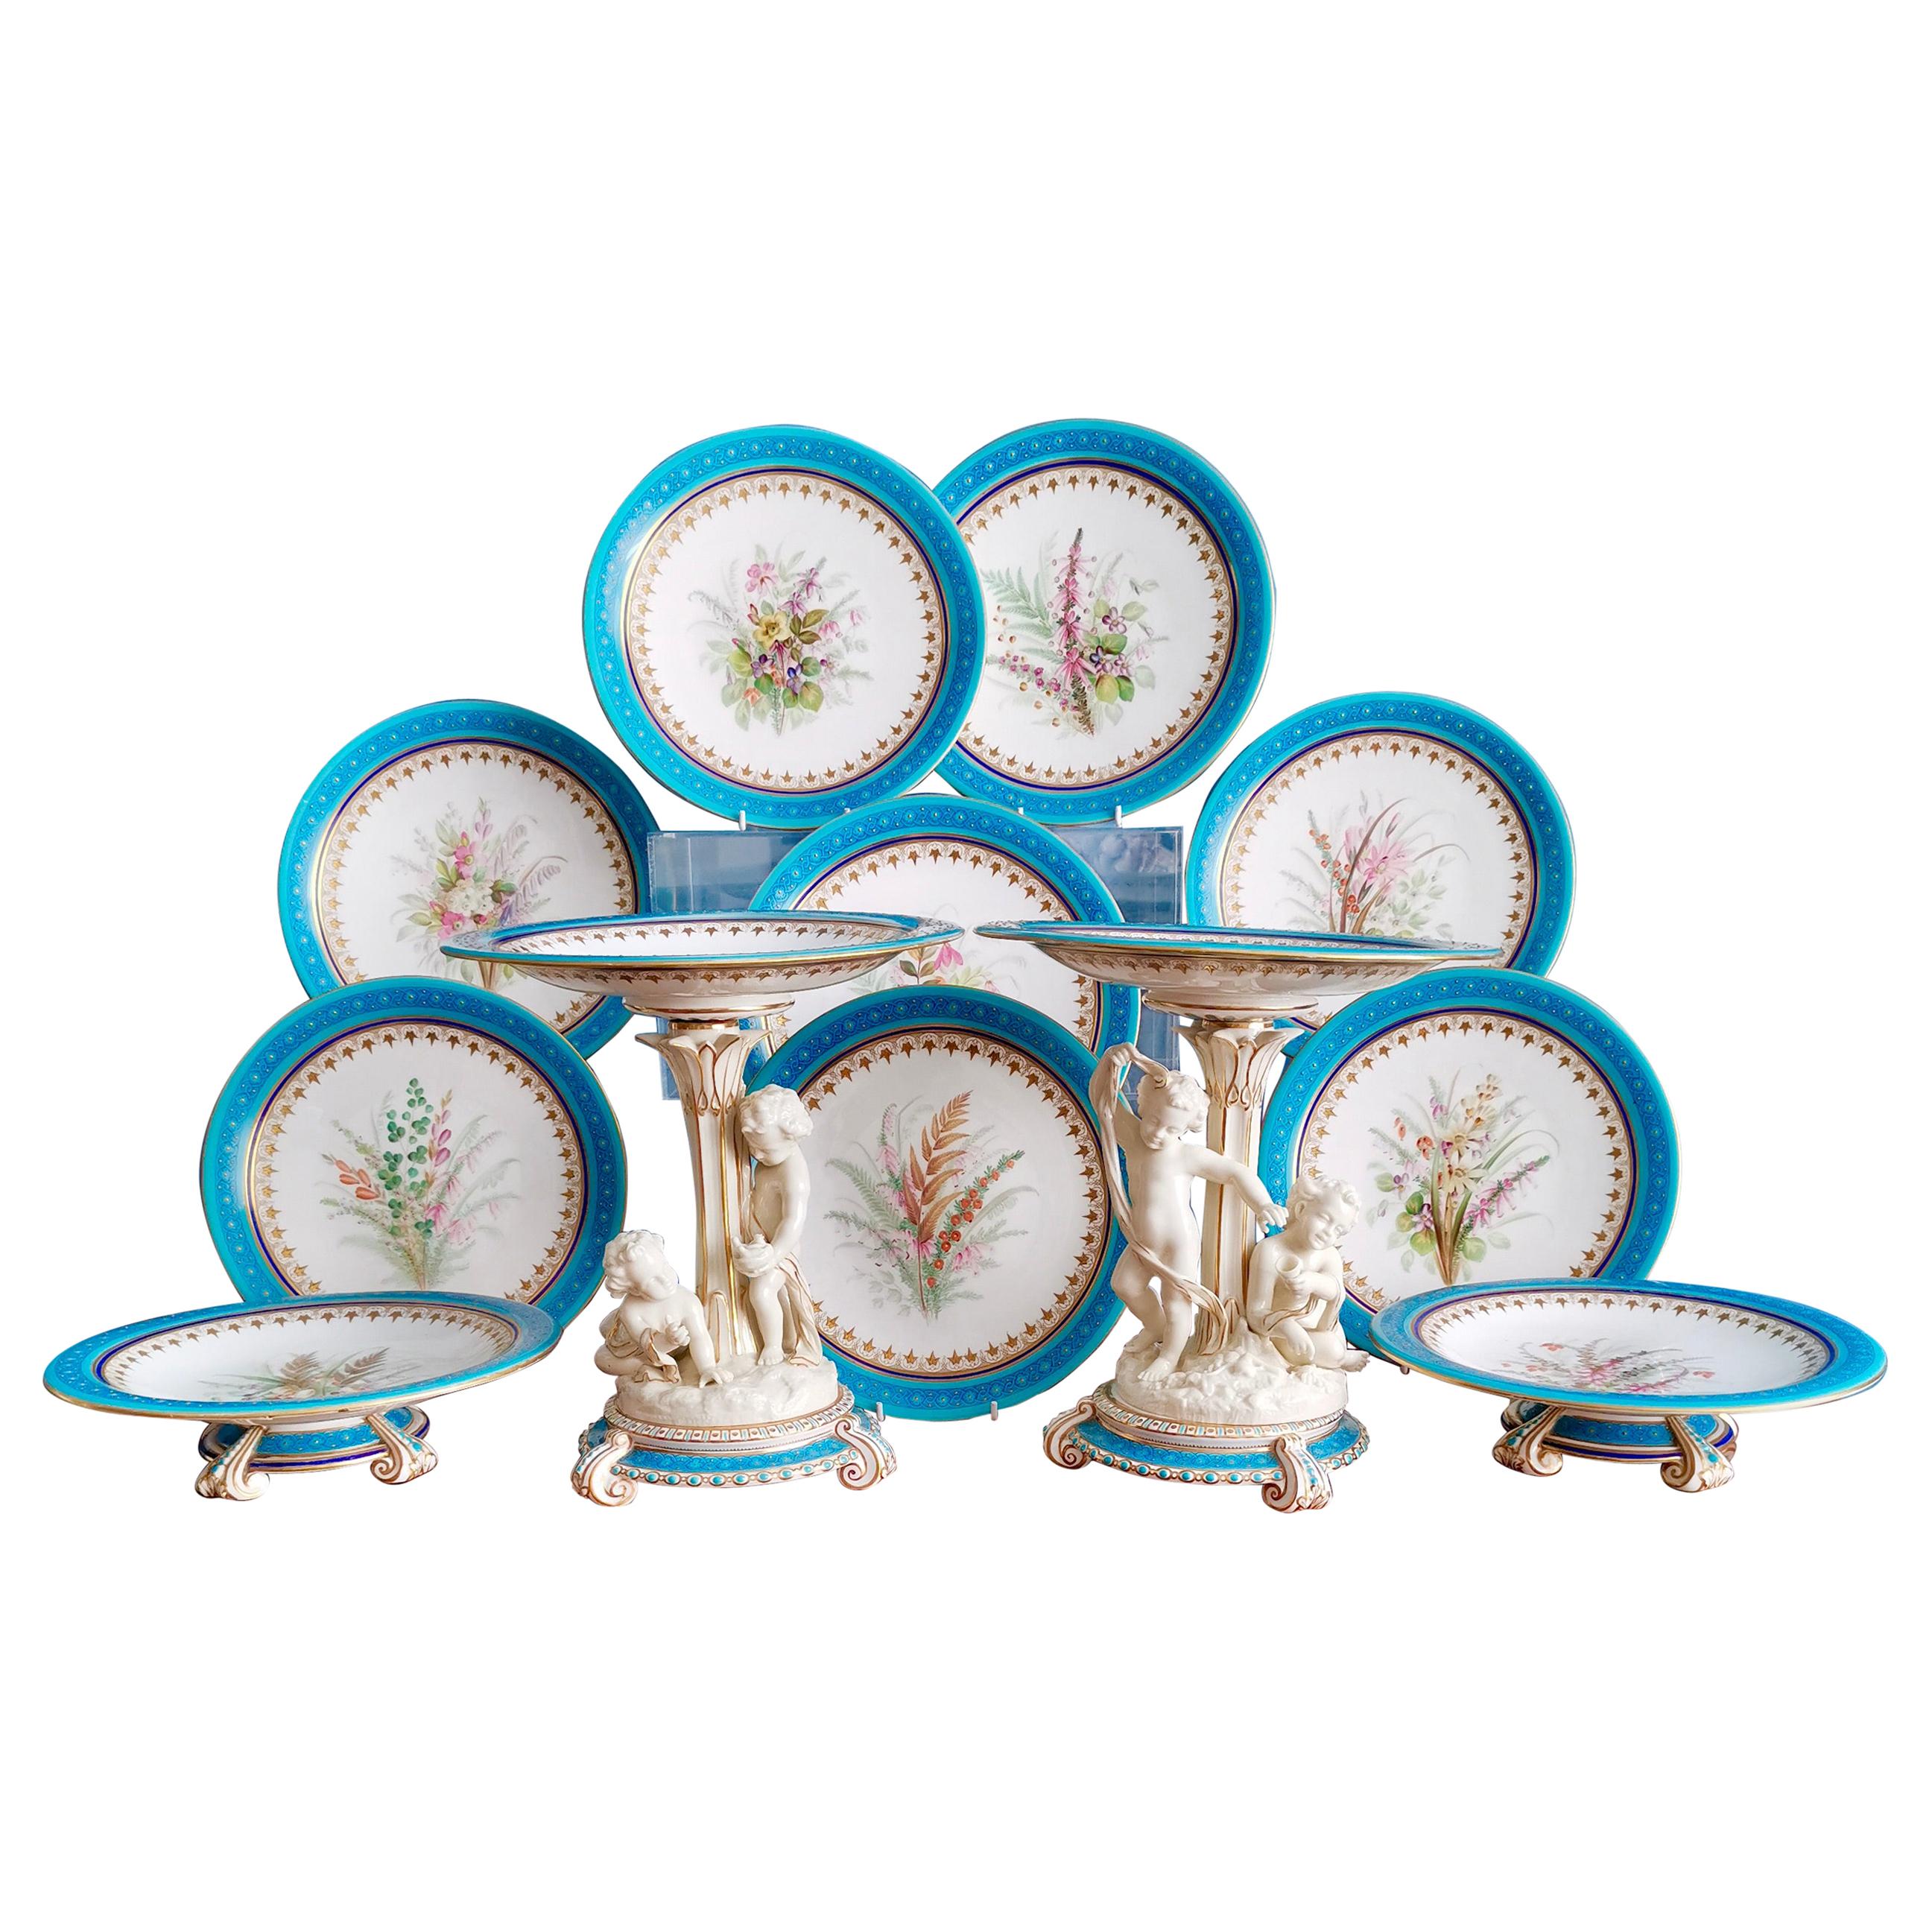 Royal Worcester Porcelain Dessert Service, Turquoise with Parian Cherubs, 1910